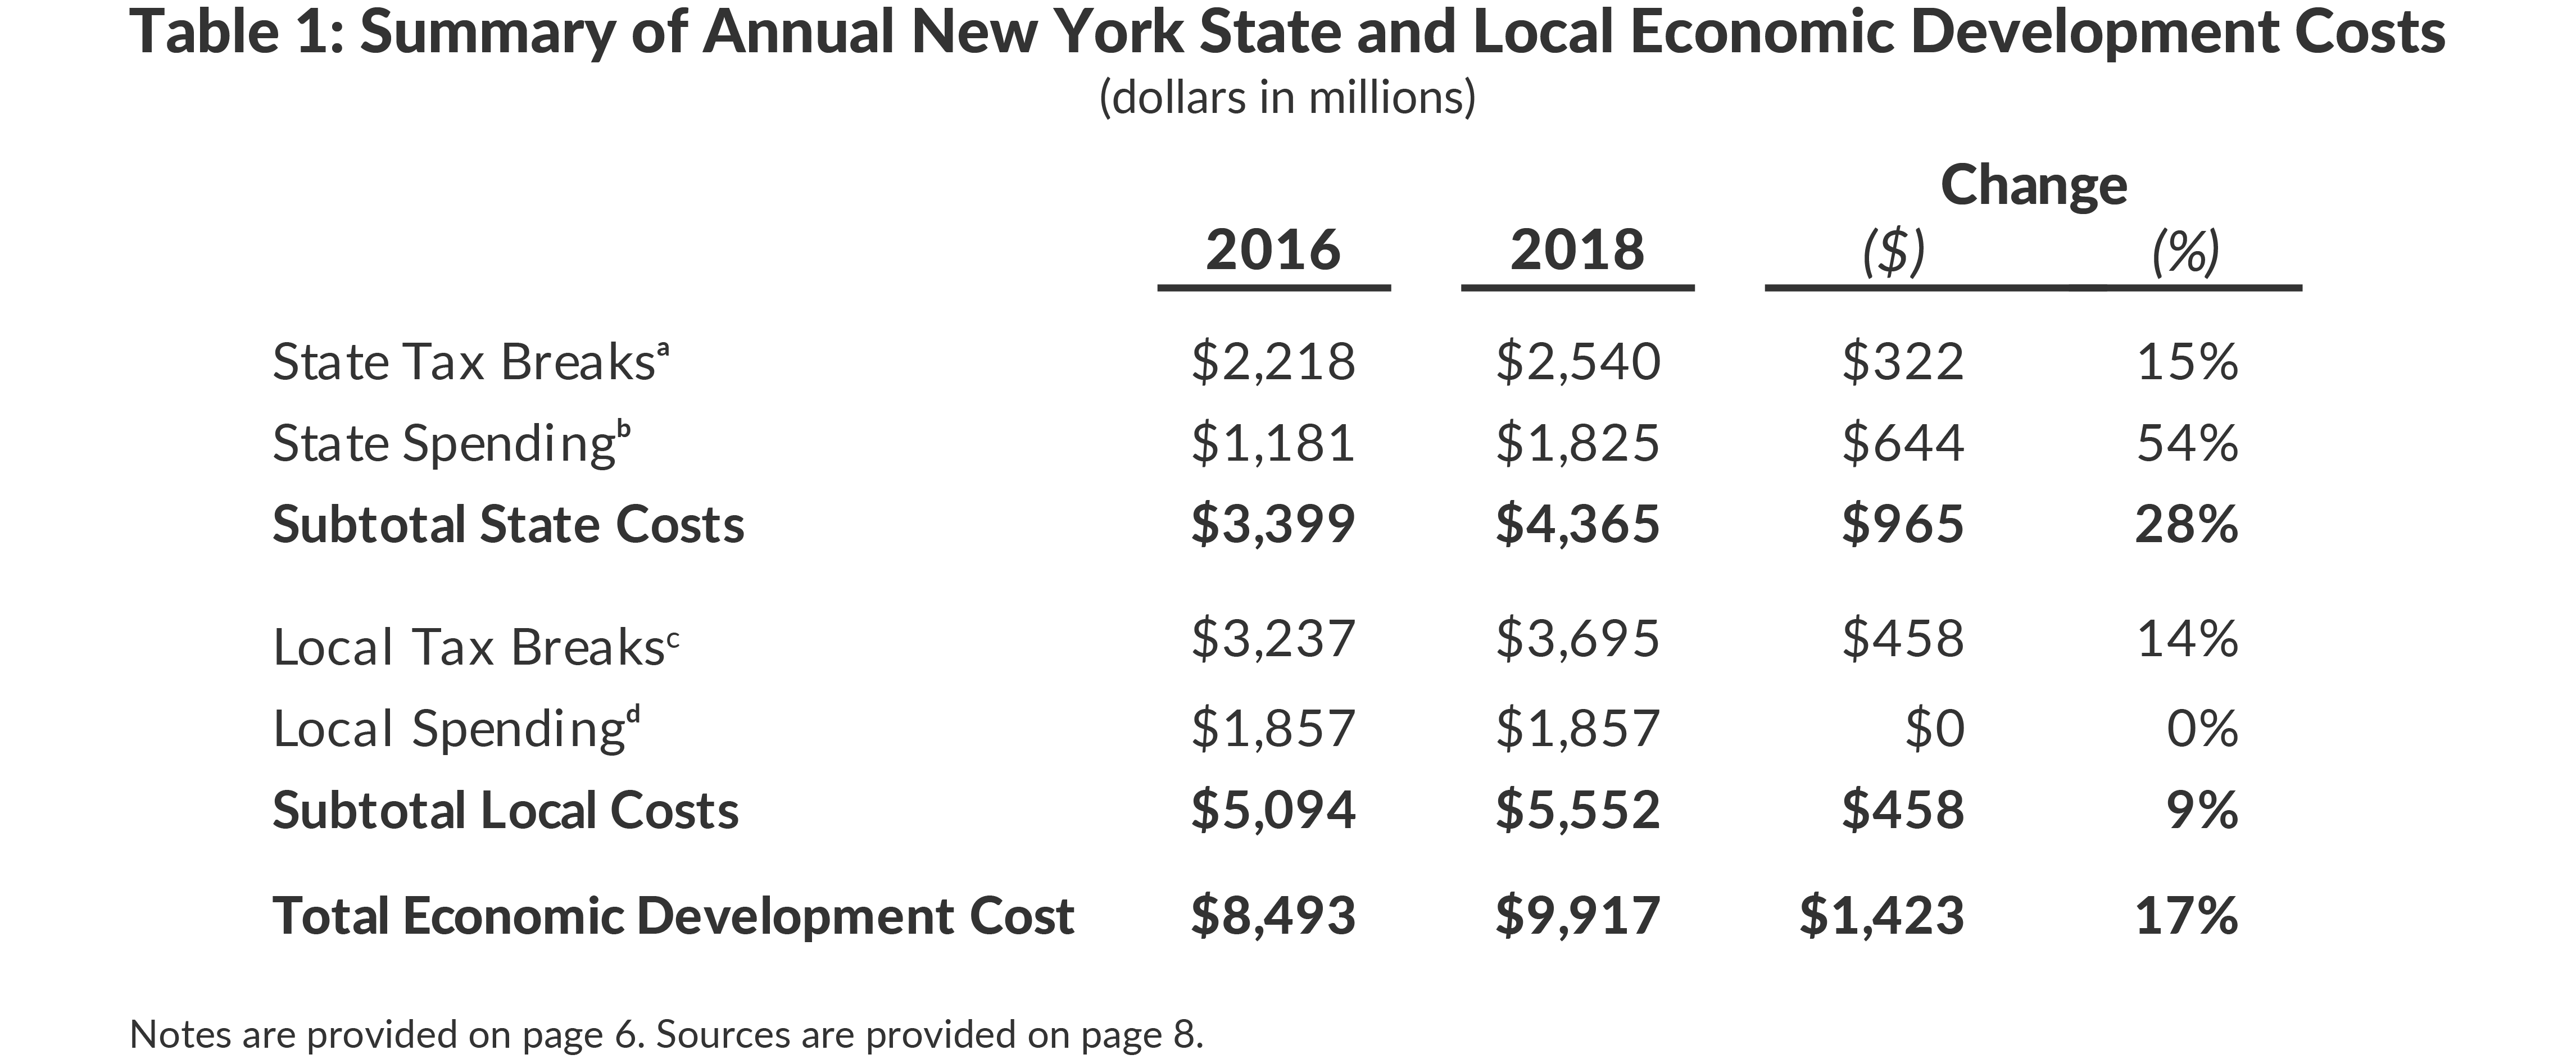 Table 1: Summary of Annual New York State and Local Economic Development Costs